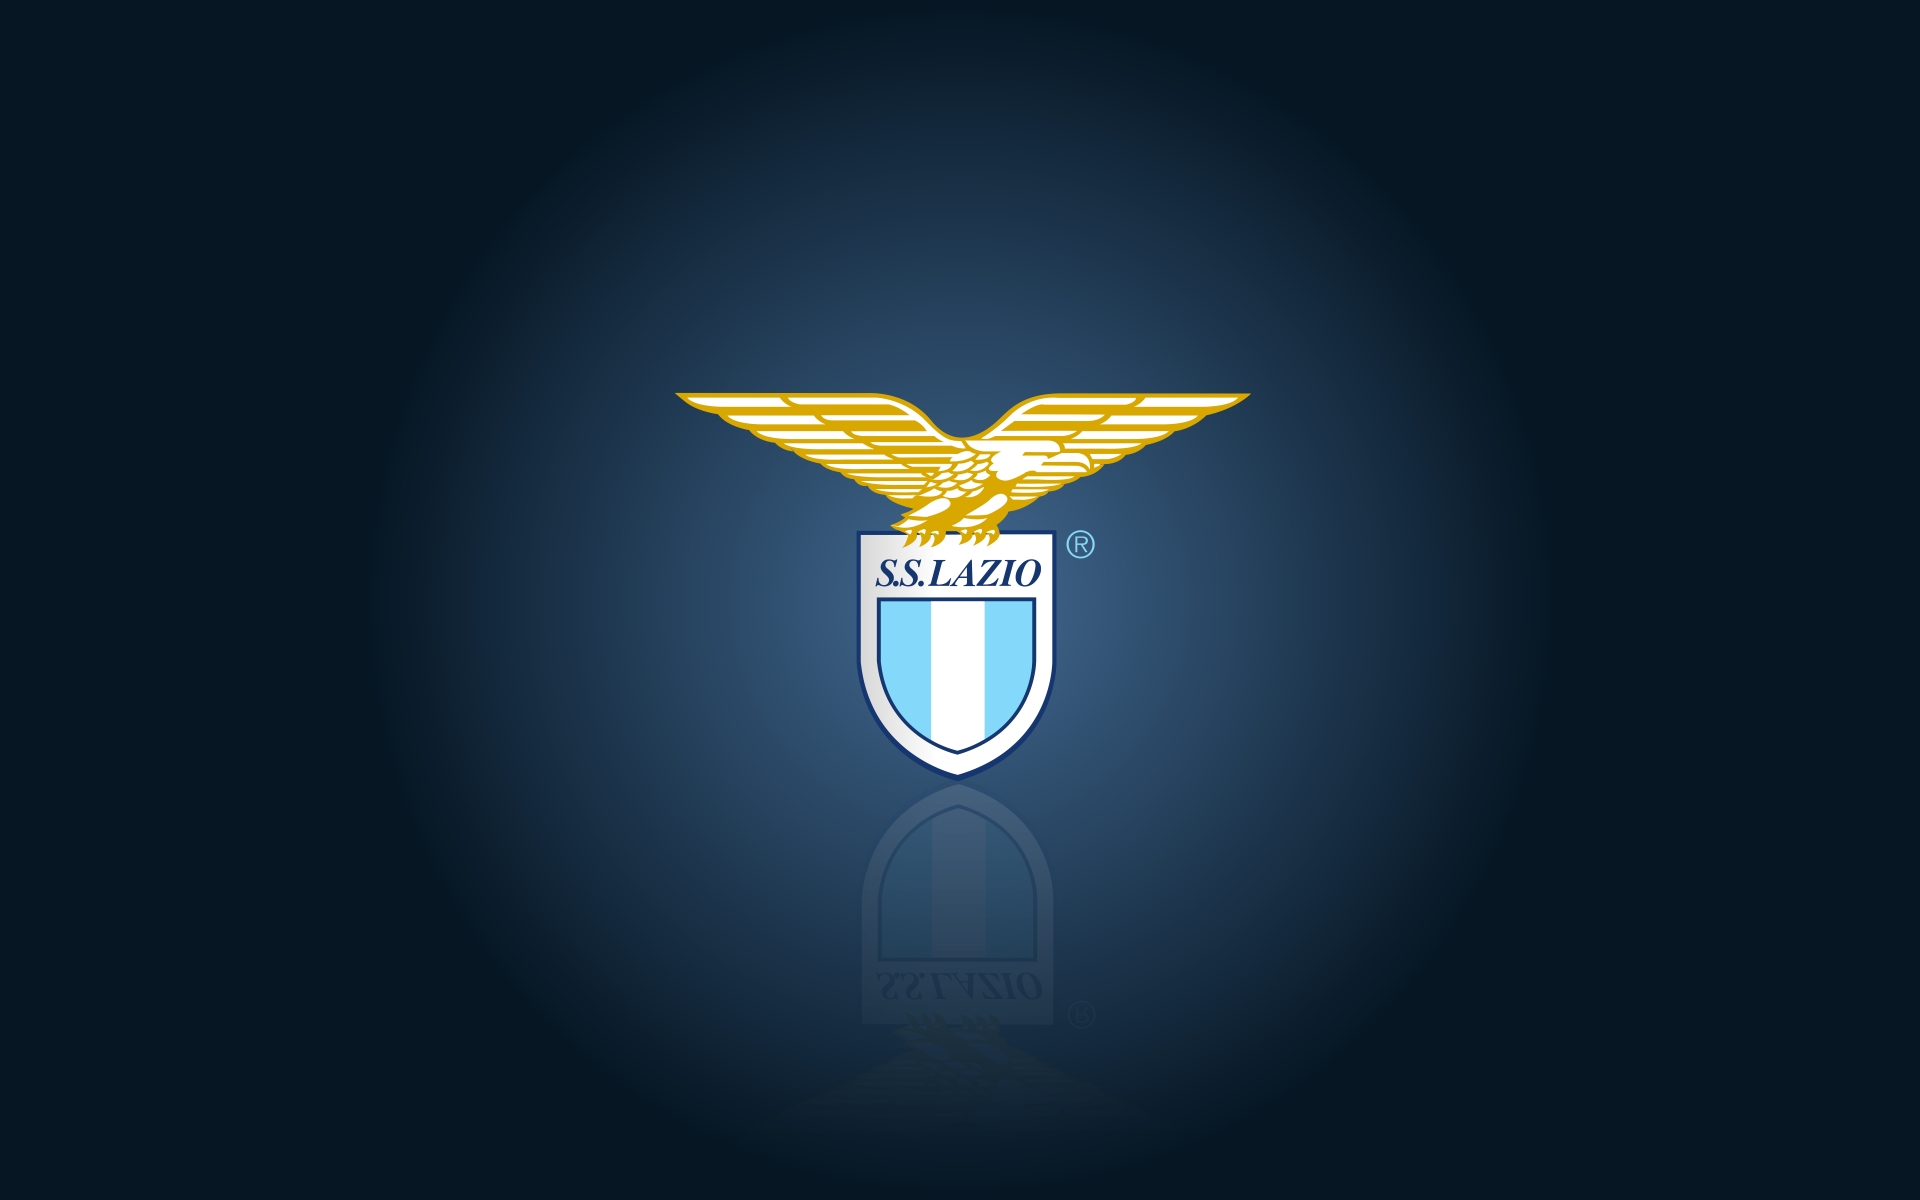 A new title challenger? Lazio defeats Juve at home in Serie A after 16 years! 